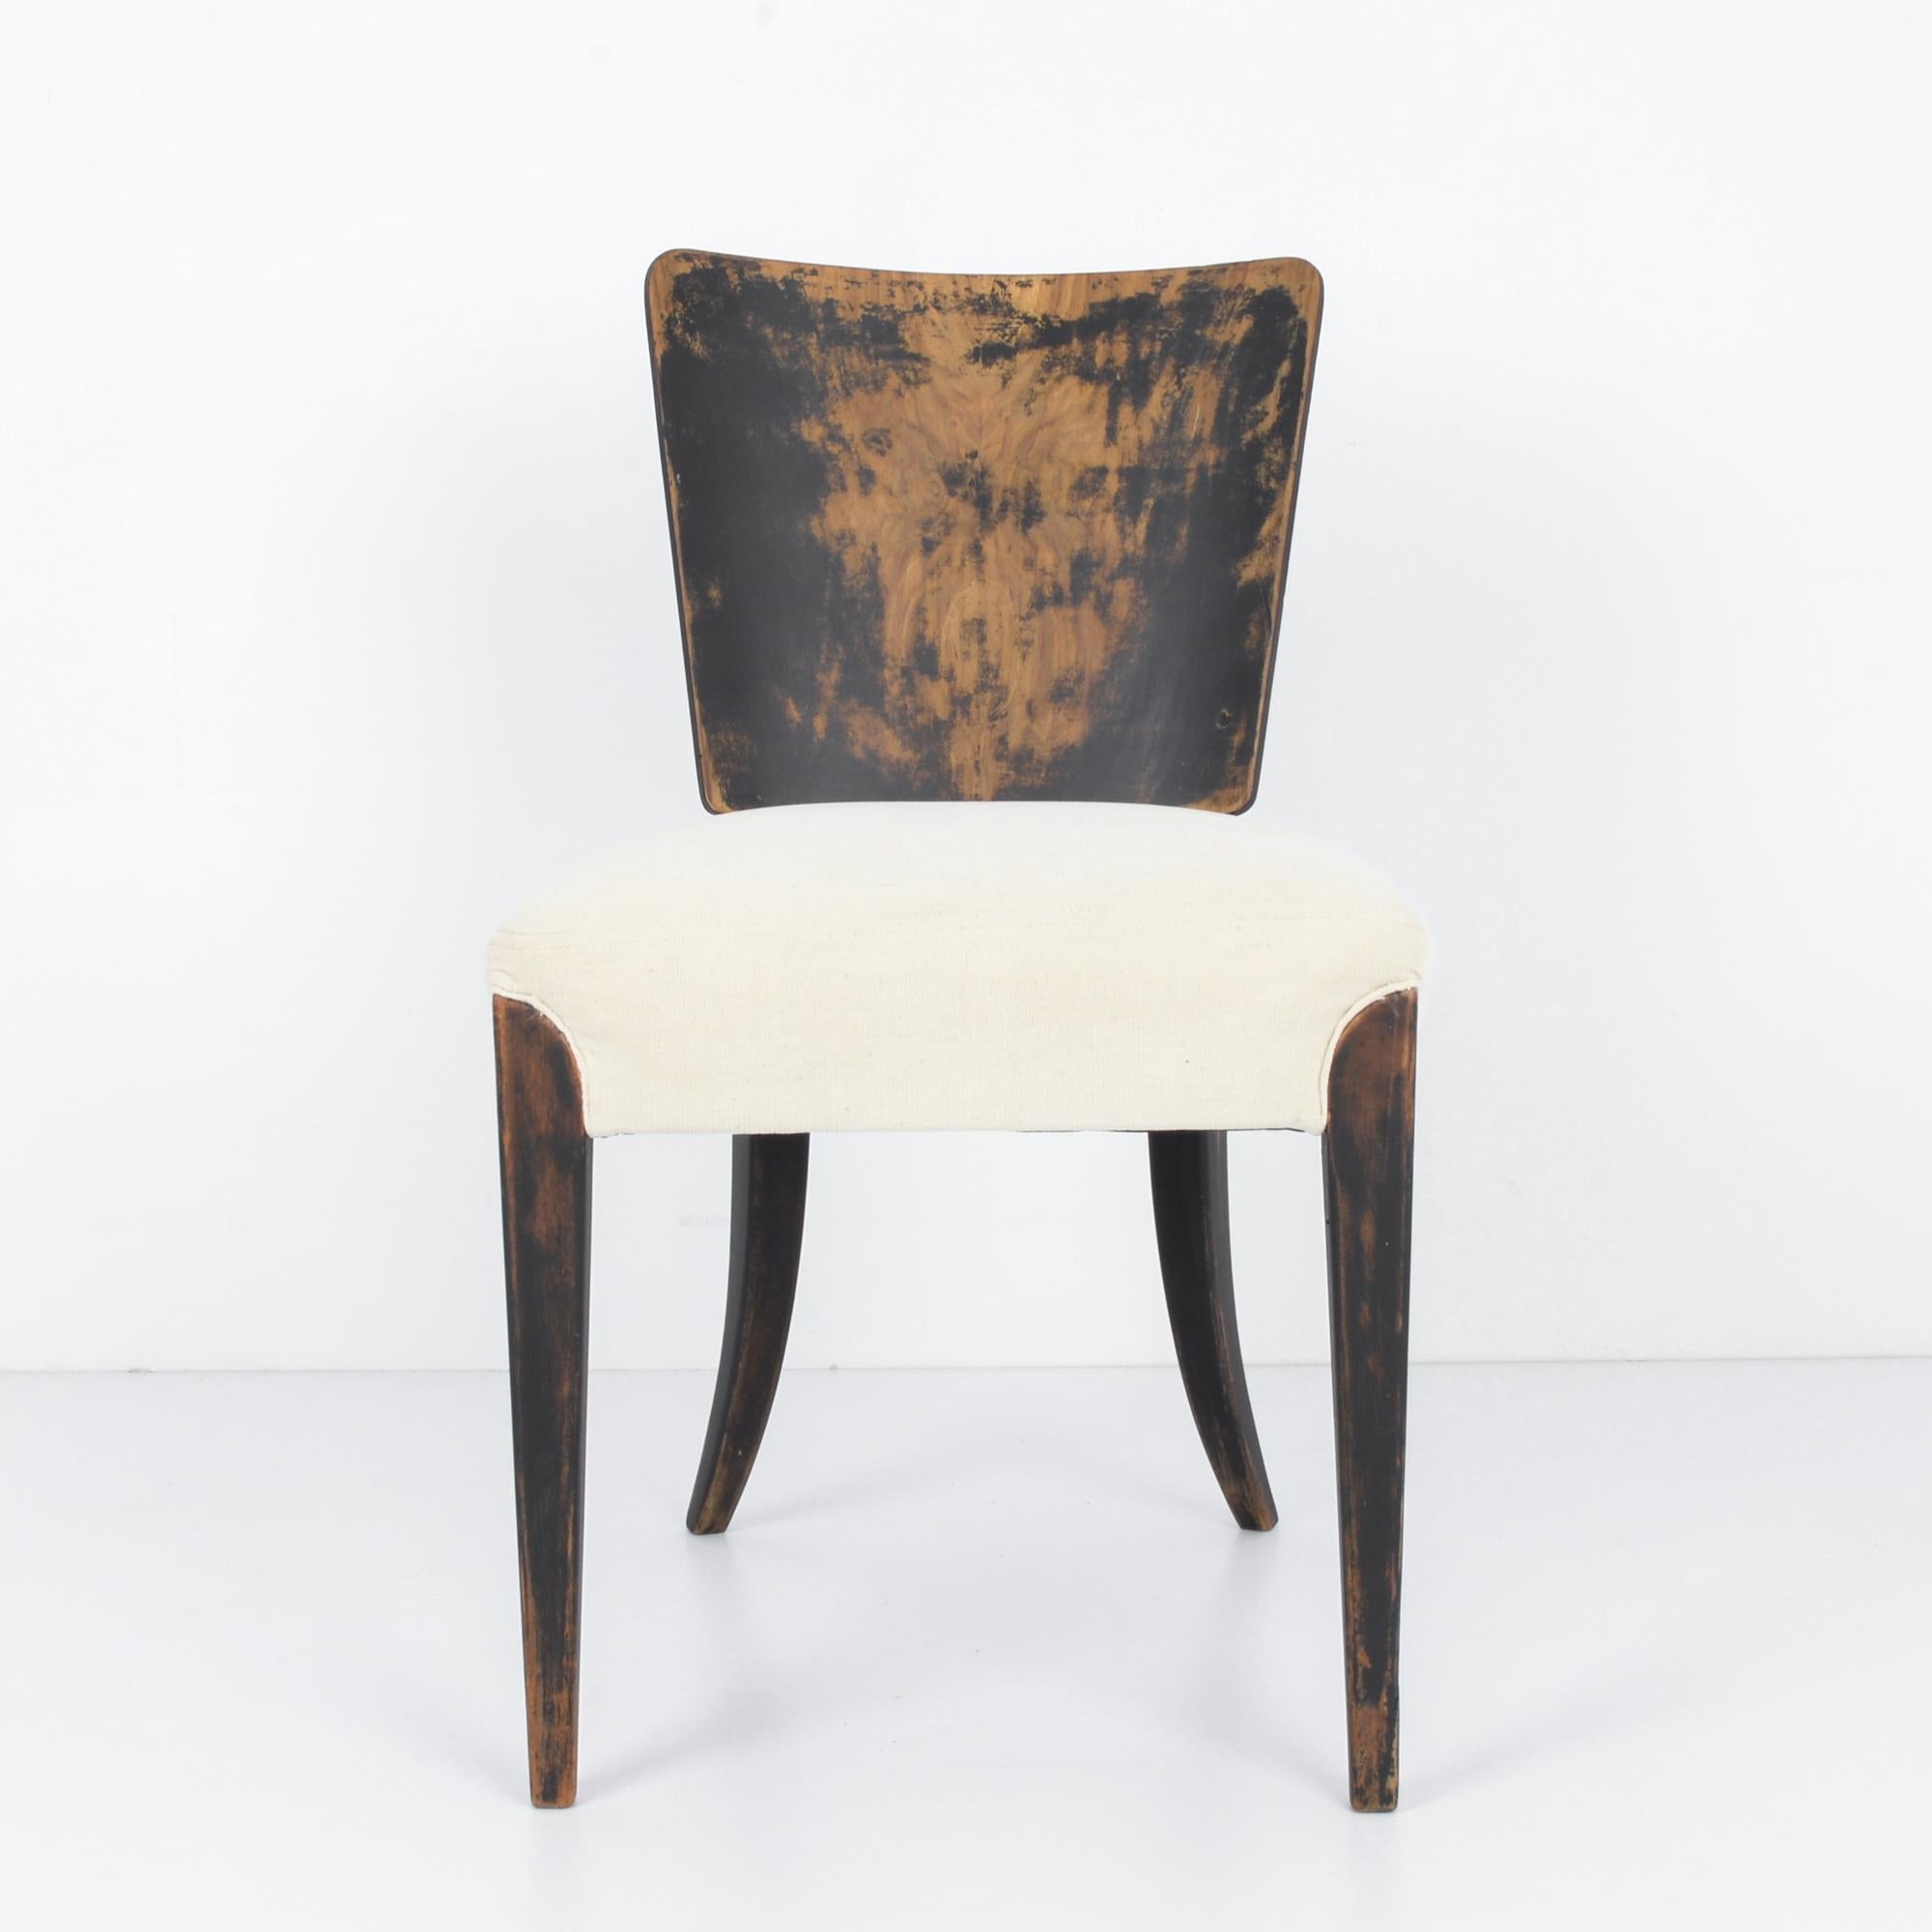 A wooden chair with upholstered seat by esteemed Czech designer Jindrich Halabala, circa 1940. An exemplar of the H-214 design, originally produced by Czech firm UP Brno. The tapered legs of black patinated wood emerge like great fangs to sink in